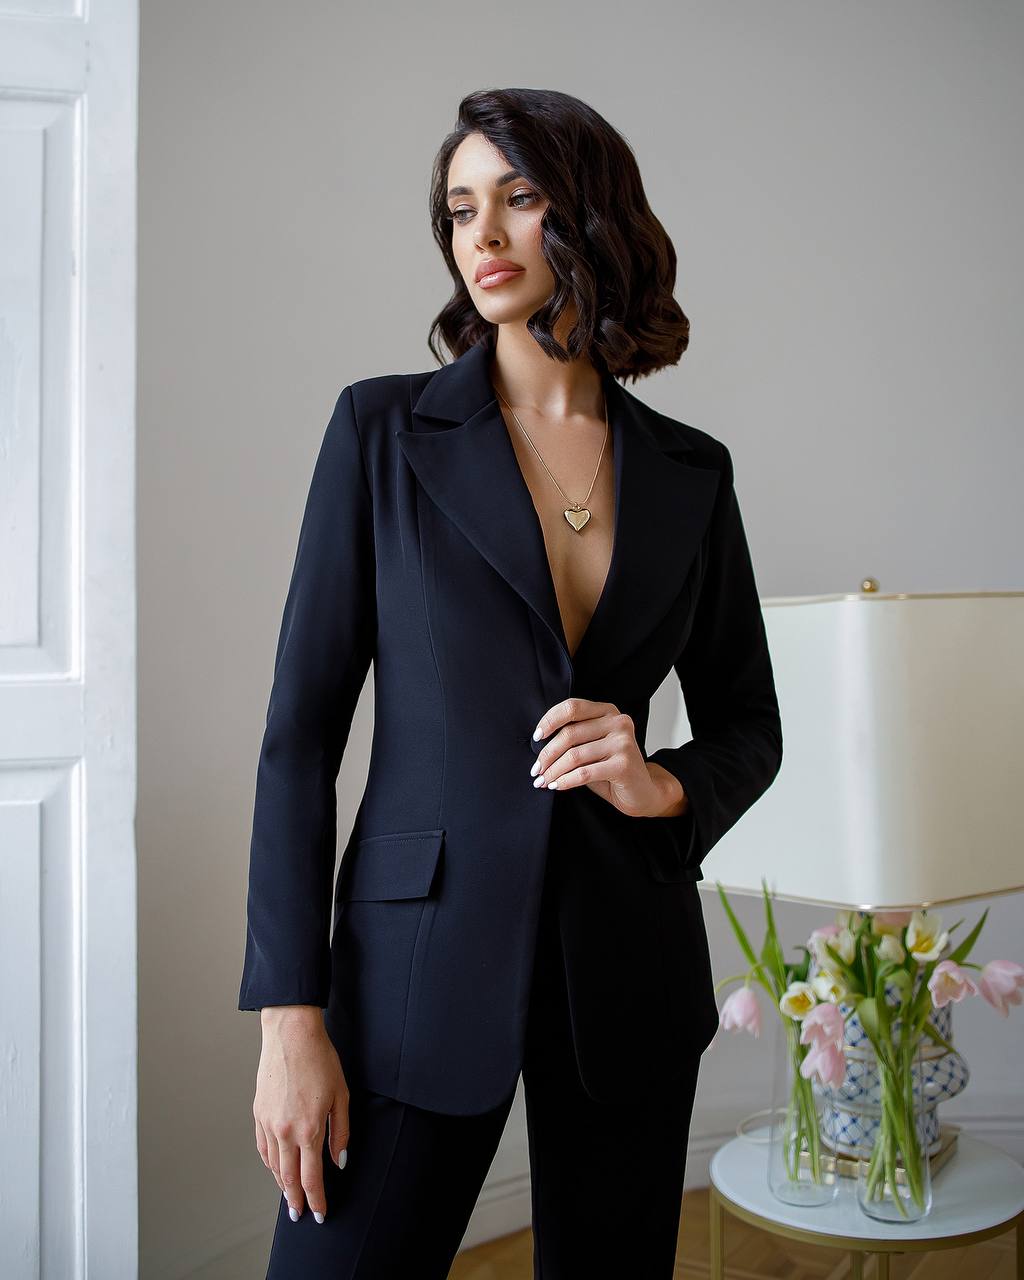 a woman in a black suit posing for a picture